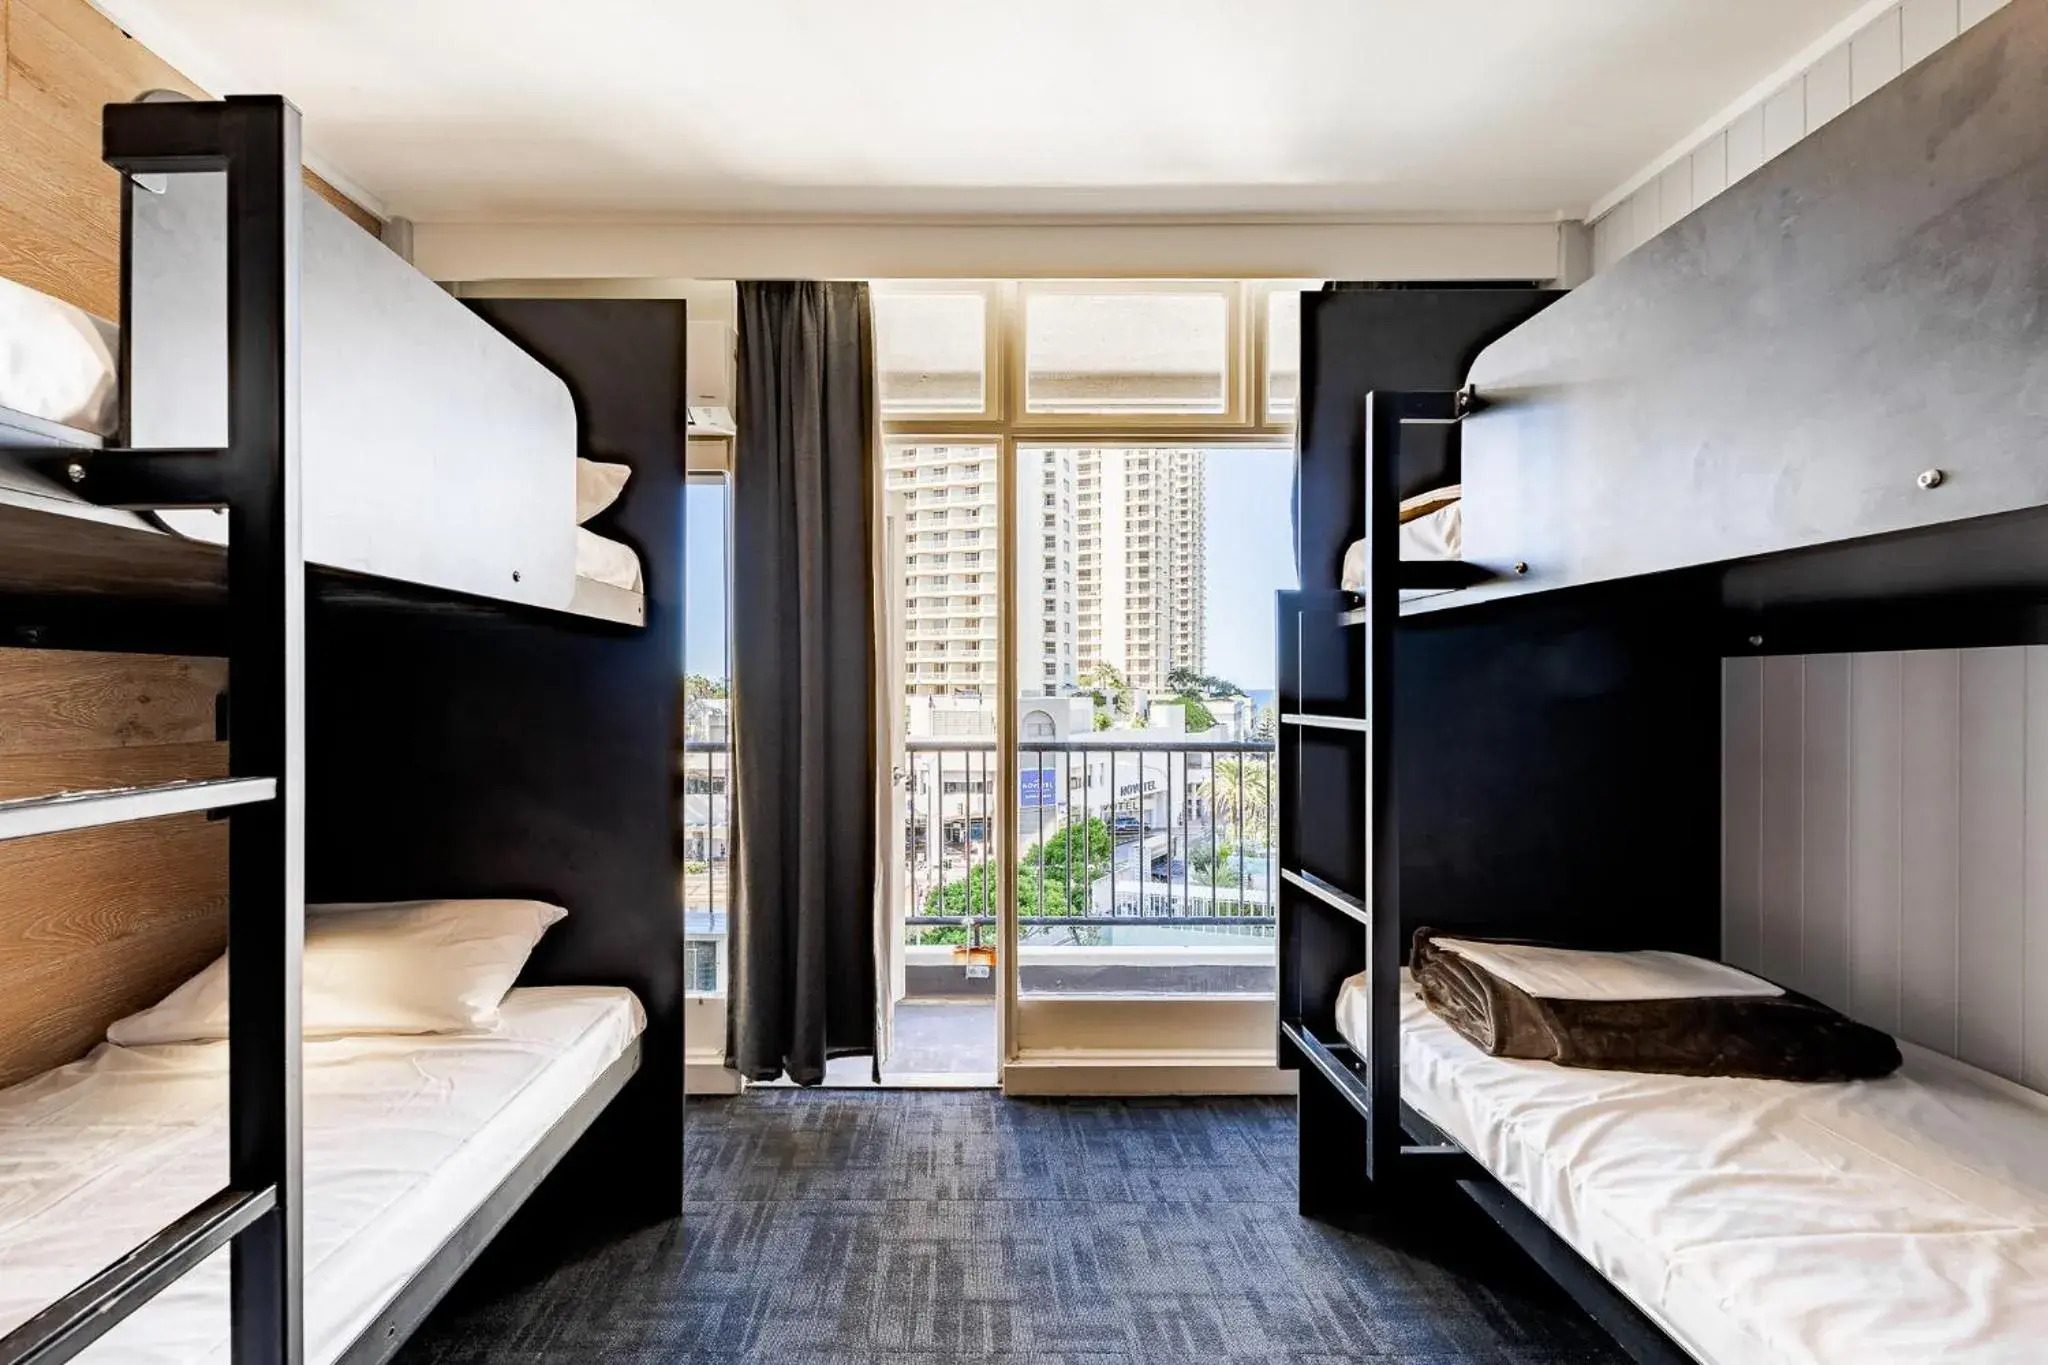 Bed, Bunk Bed in Bunk Surfers Paradise